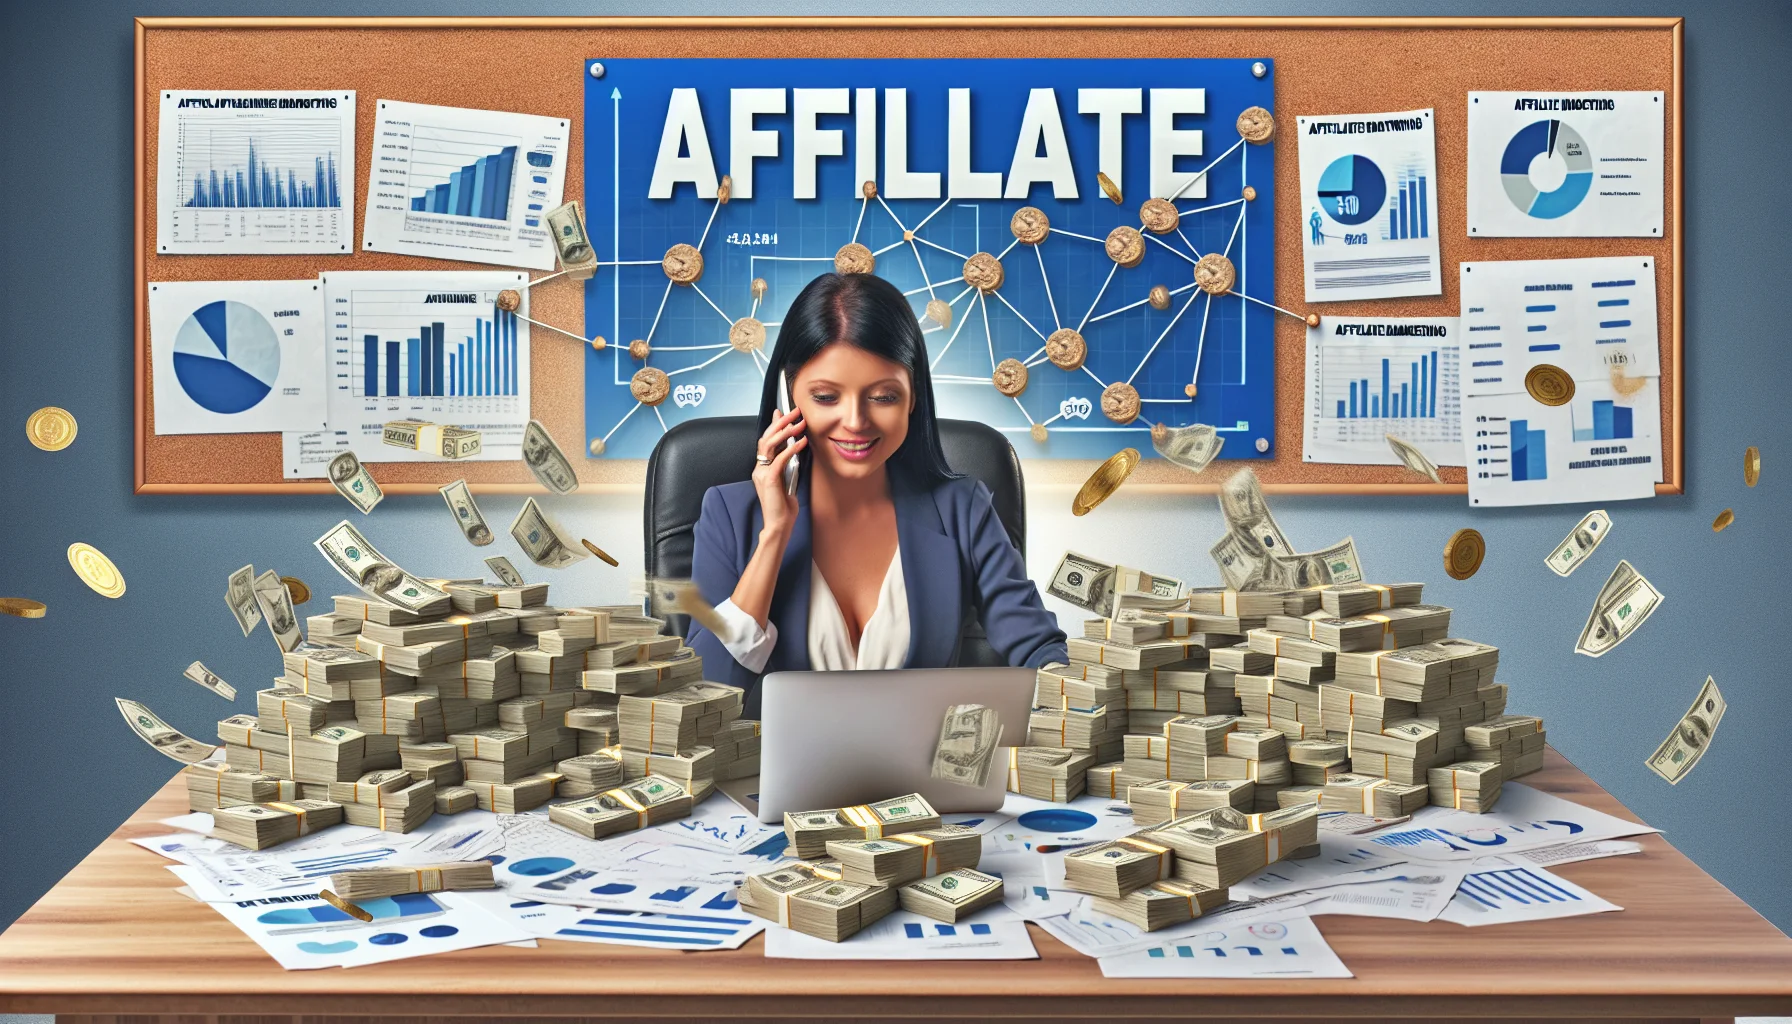 Create a humorous and realistic image. Picture a well-dressed businesswoman, of Hispanic descent, sitting behind a desk piled with papers, charts, and graphs, all denoting growth in income. A computer screen showing increasing online sales graphs is prominently displayed on her desk. A big bright blue sign spelling 'Affiliate Marketing' hangs on the wall behind her. She is multitasking, answering calls and typing on her laptop while managing multiple stacks of dollar bills. A layout of the affiliate network, depicted as a web, connects various online money-making sources sprinkling golden coins, indicating a steady income stream.